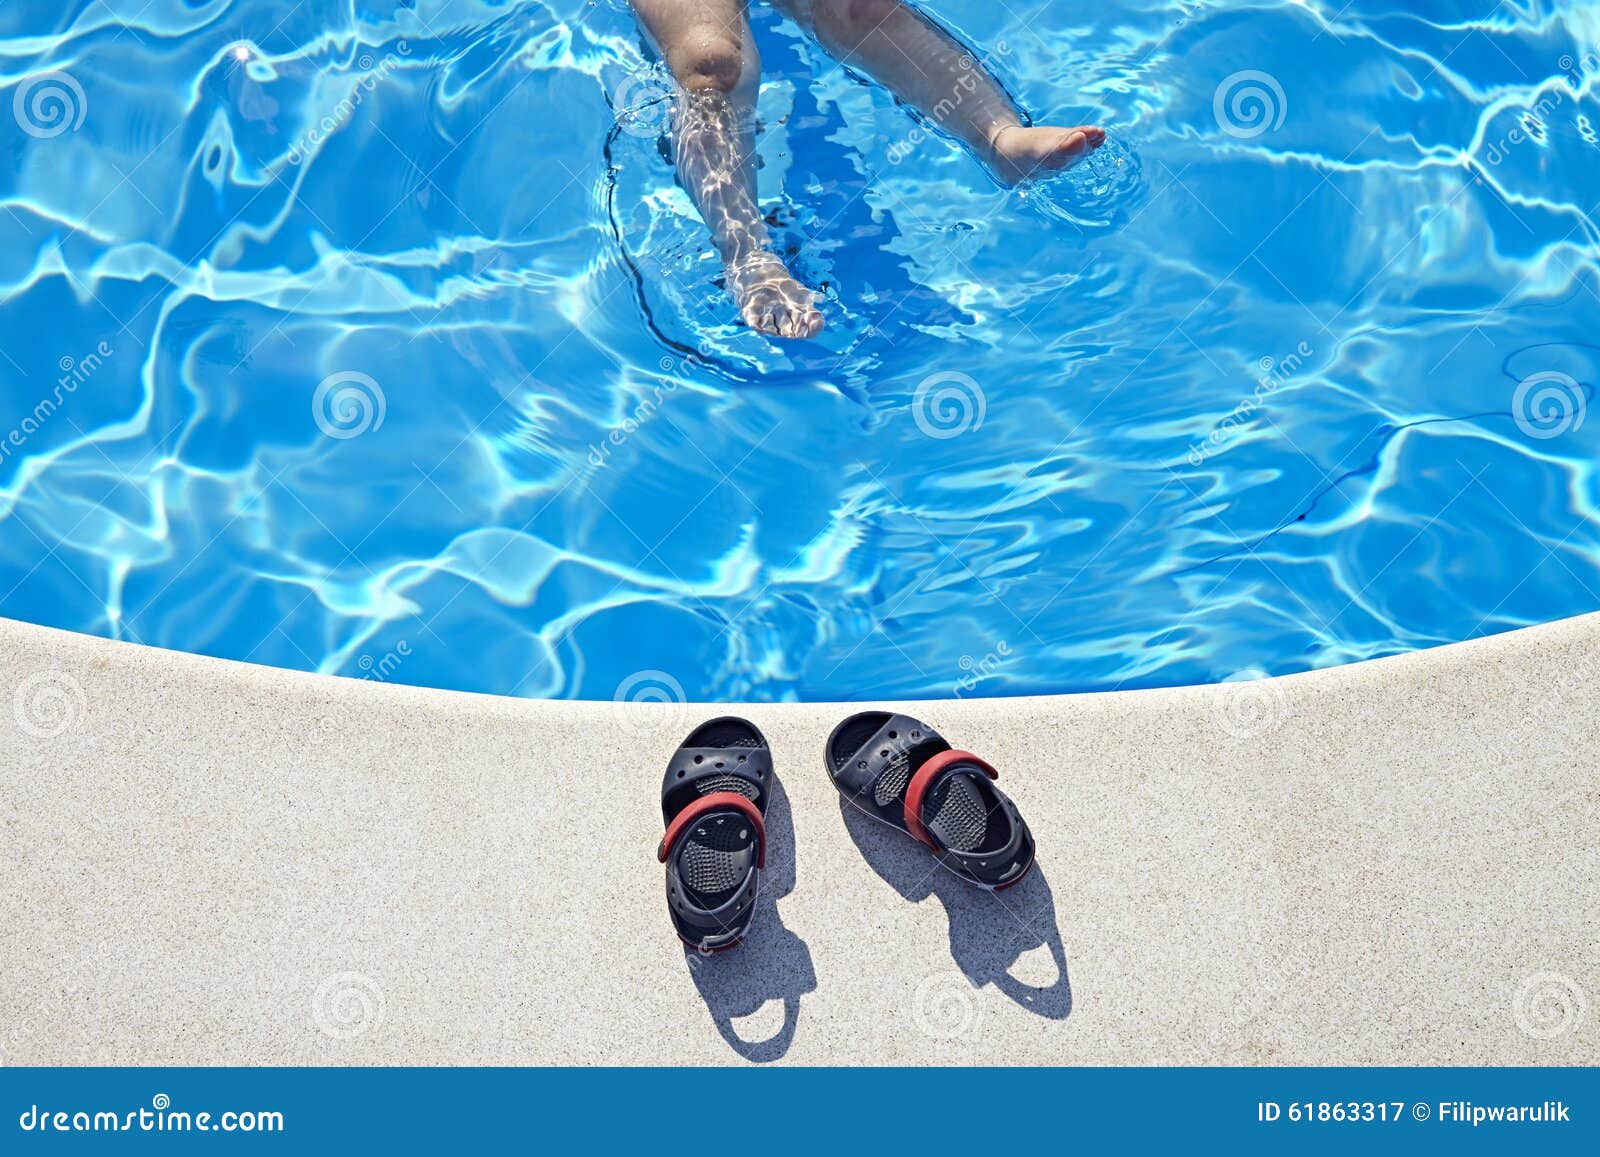 Legs and Sandals at the Swimming Pool Stock Image - Image of hotel ...